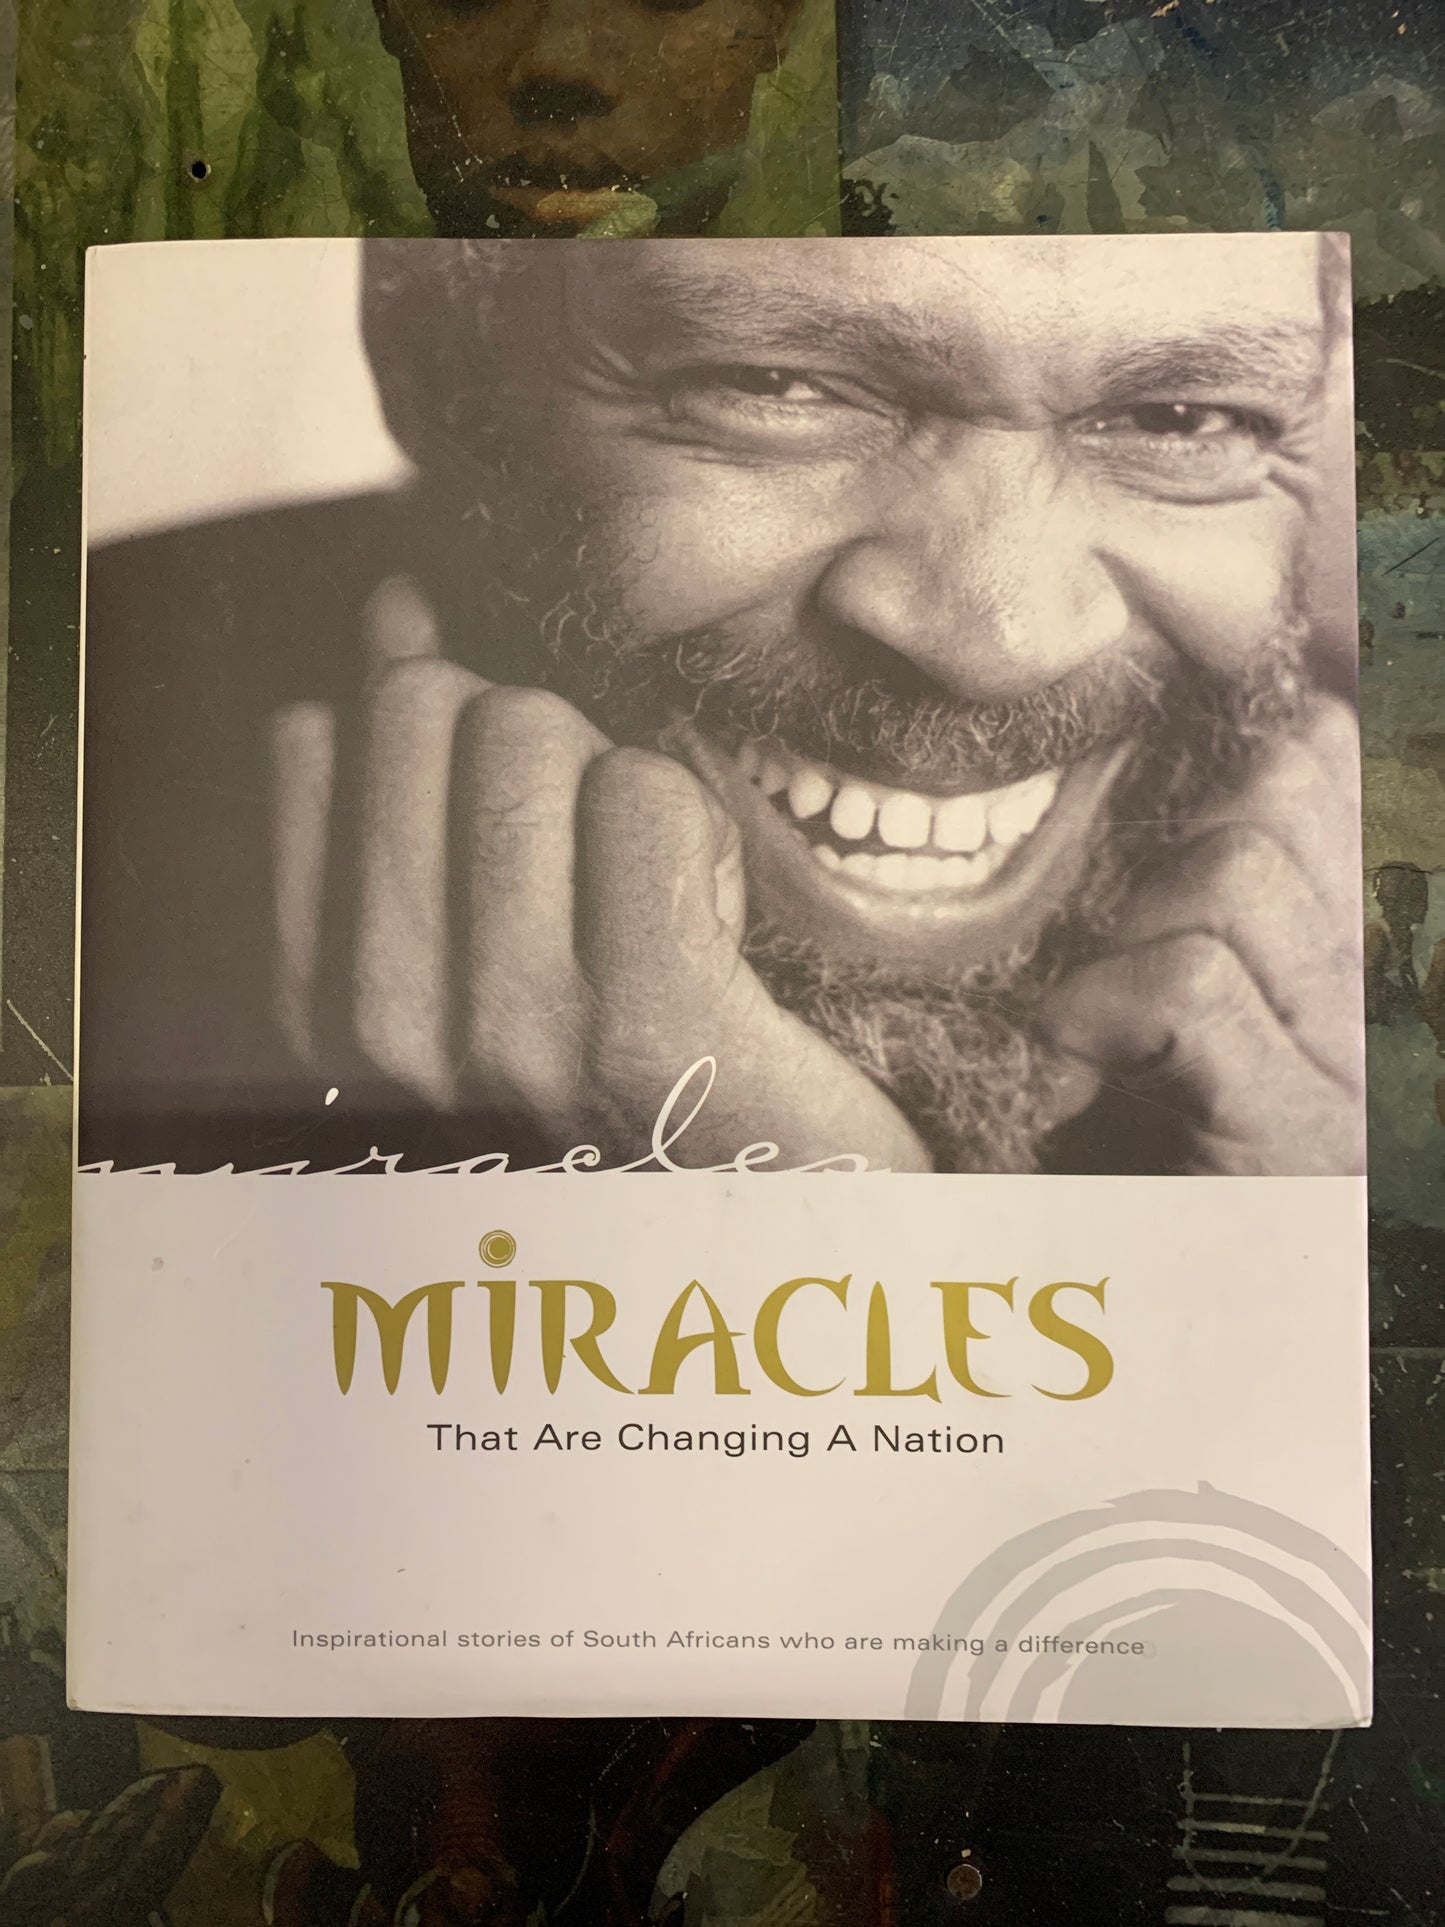 Miracles That are Changing a Nation (Hardback), by Sean Deane